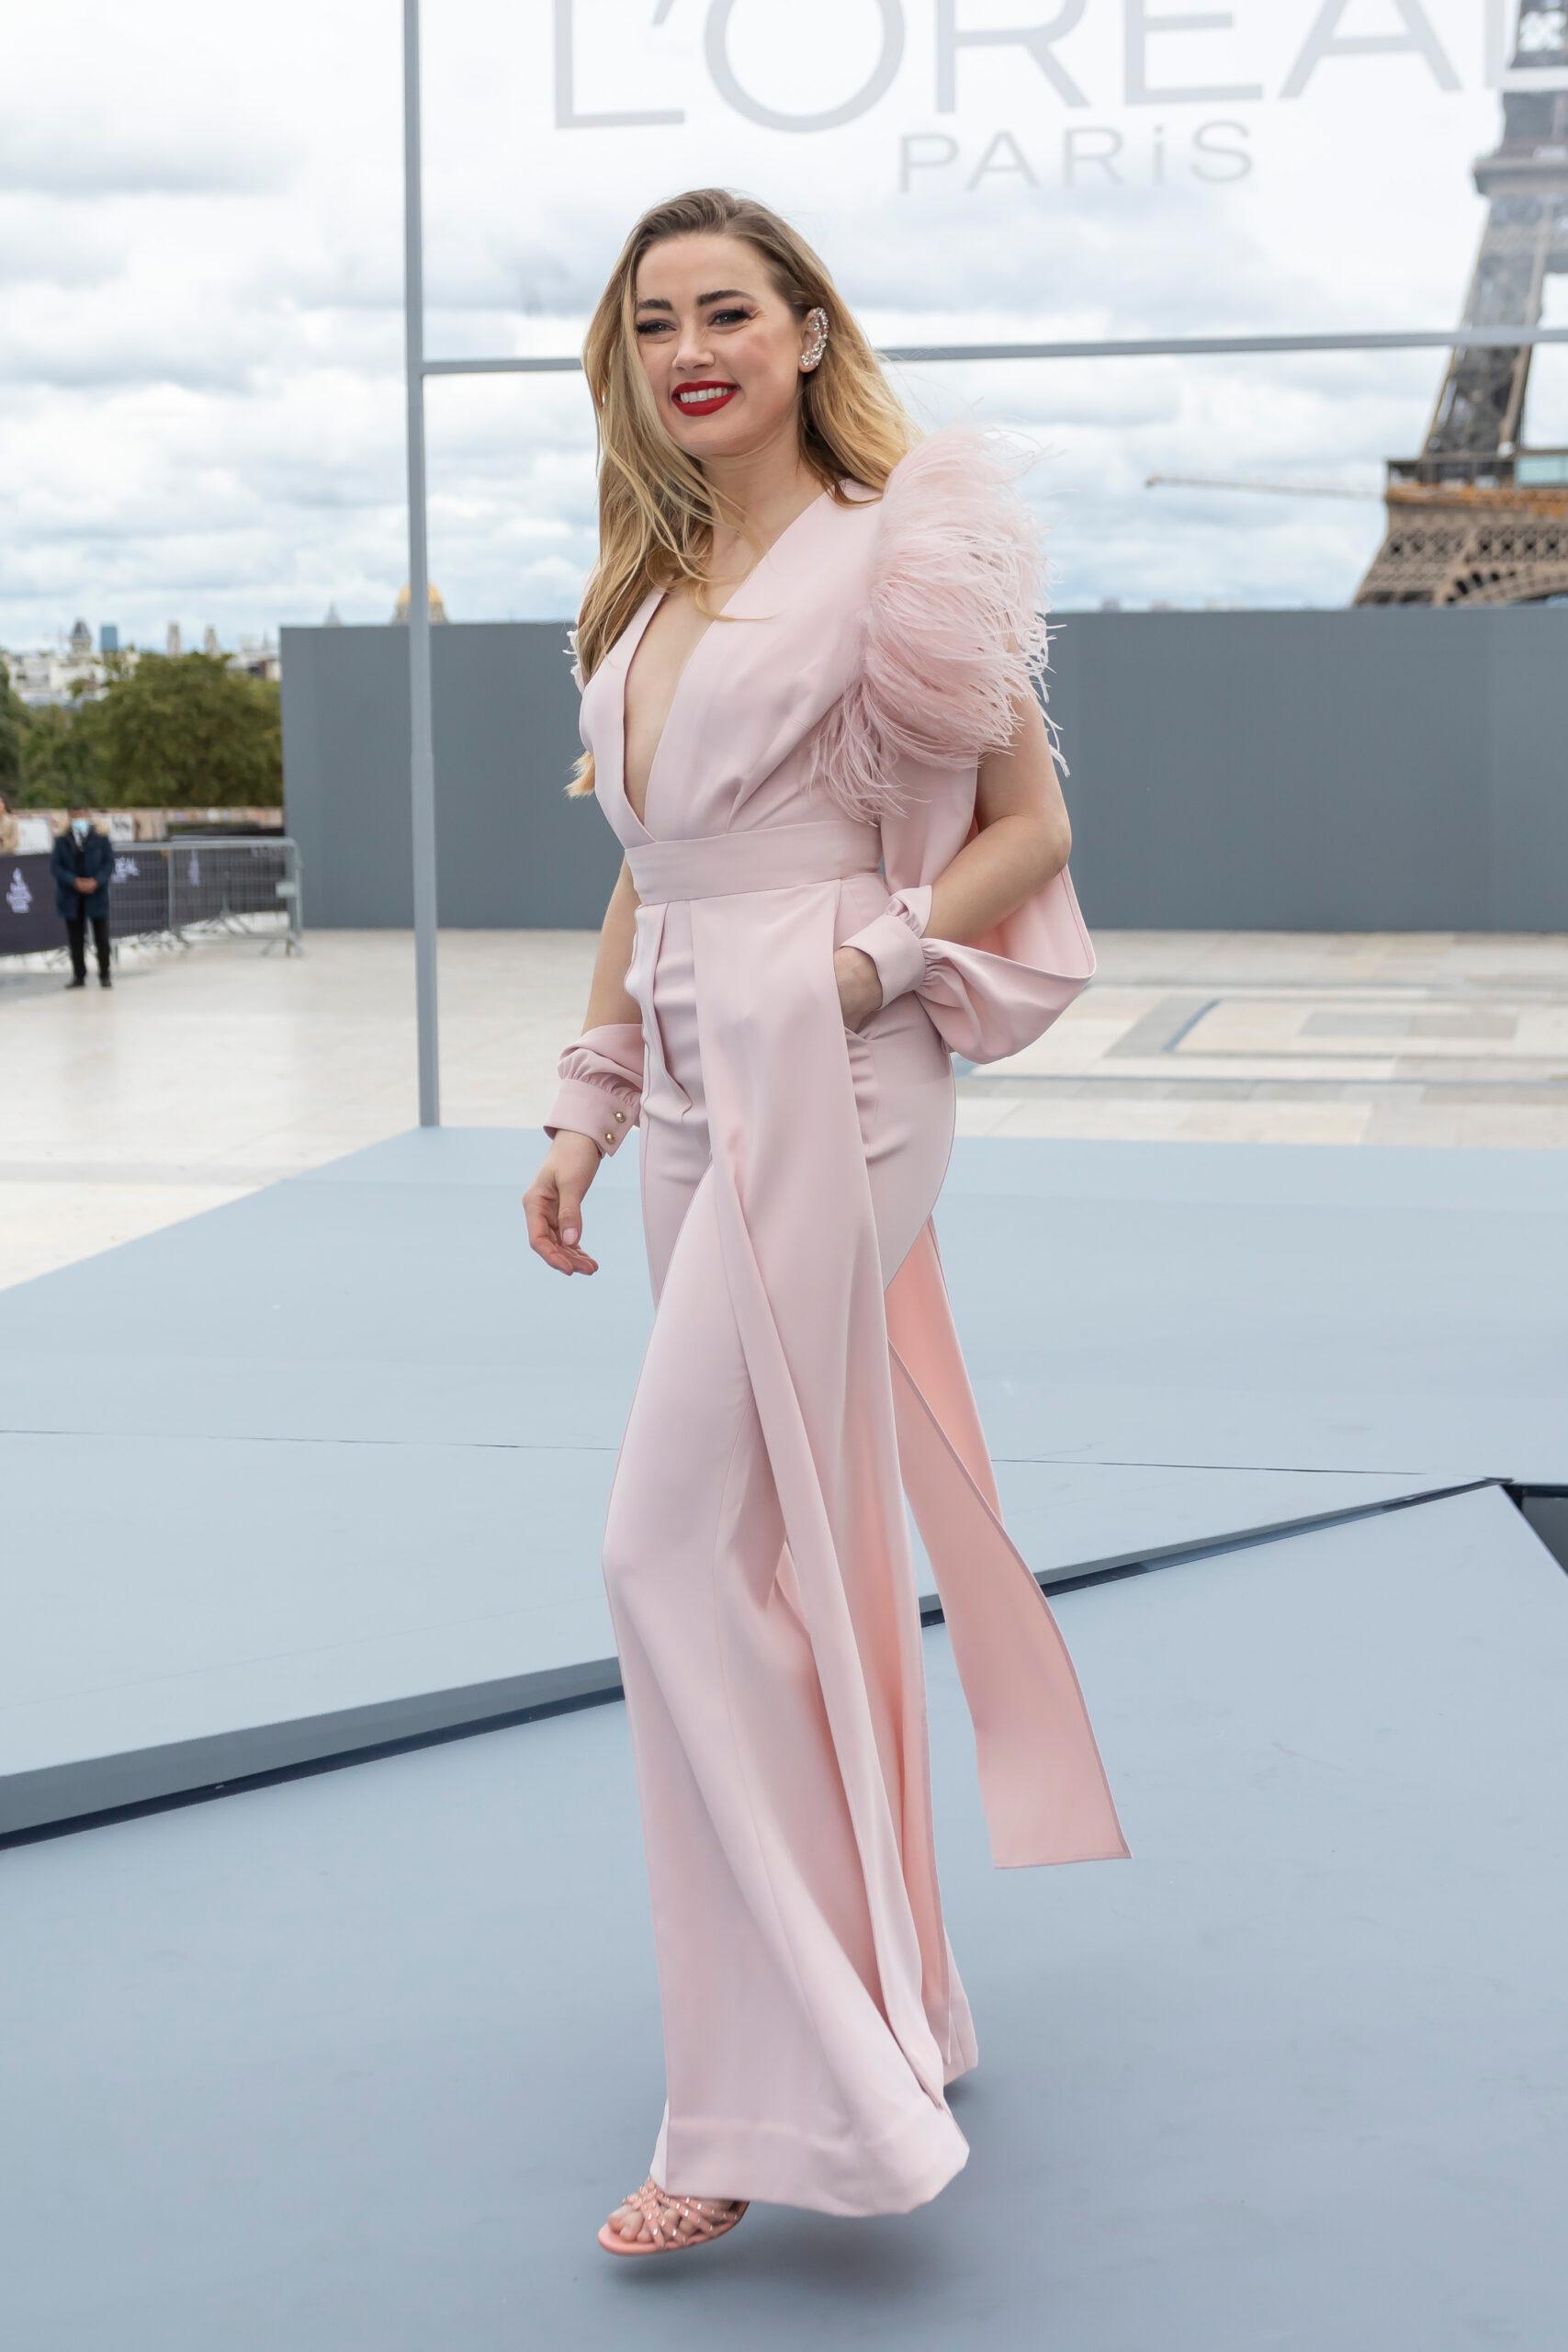 Amber Heard at the Le Defile L'Oreal Paris 2021 during the Fashion Week